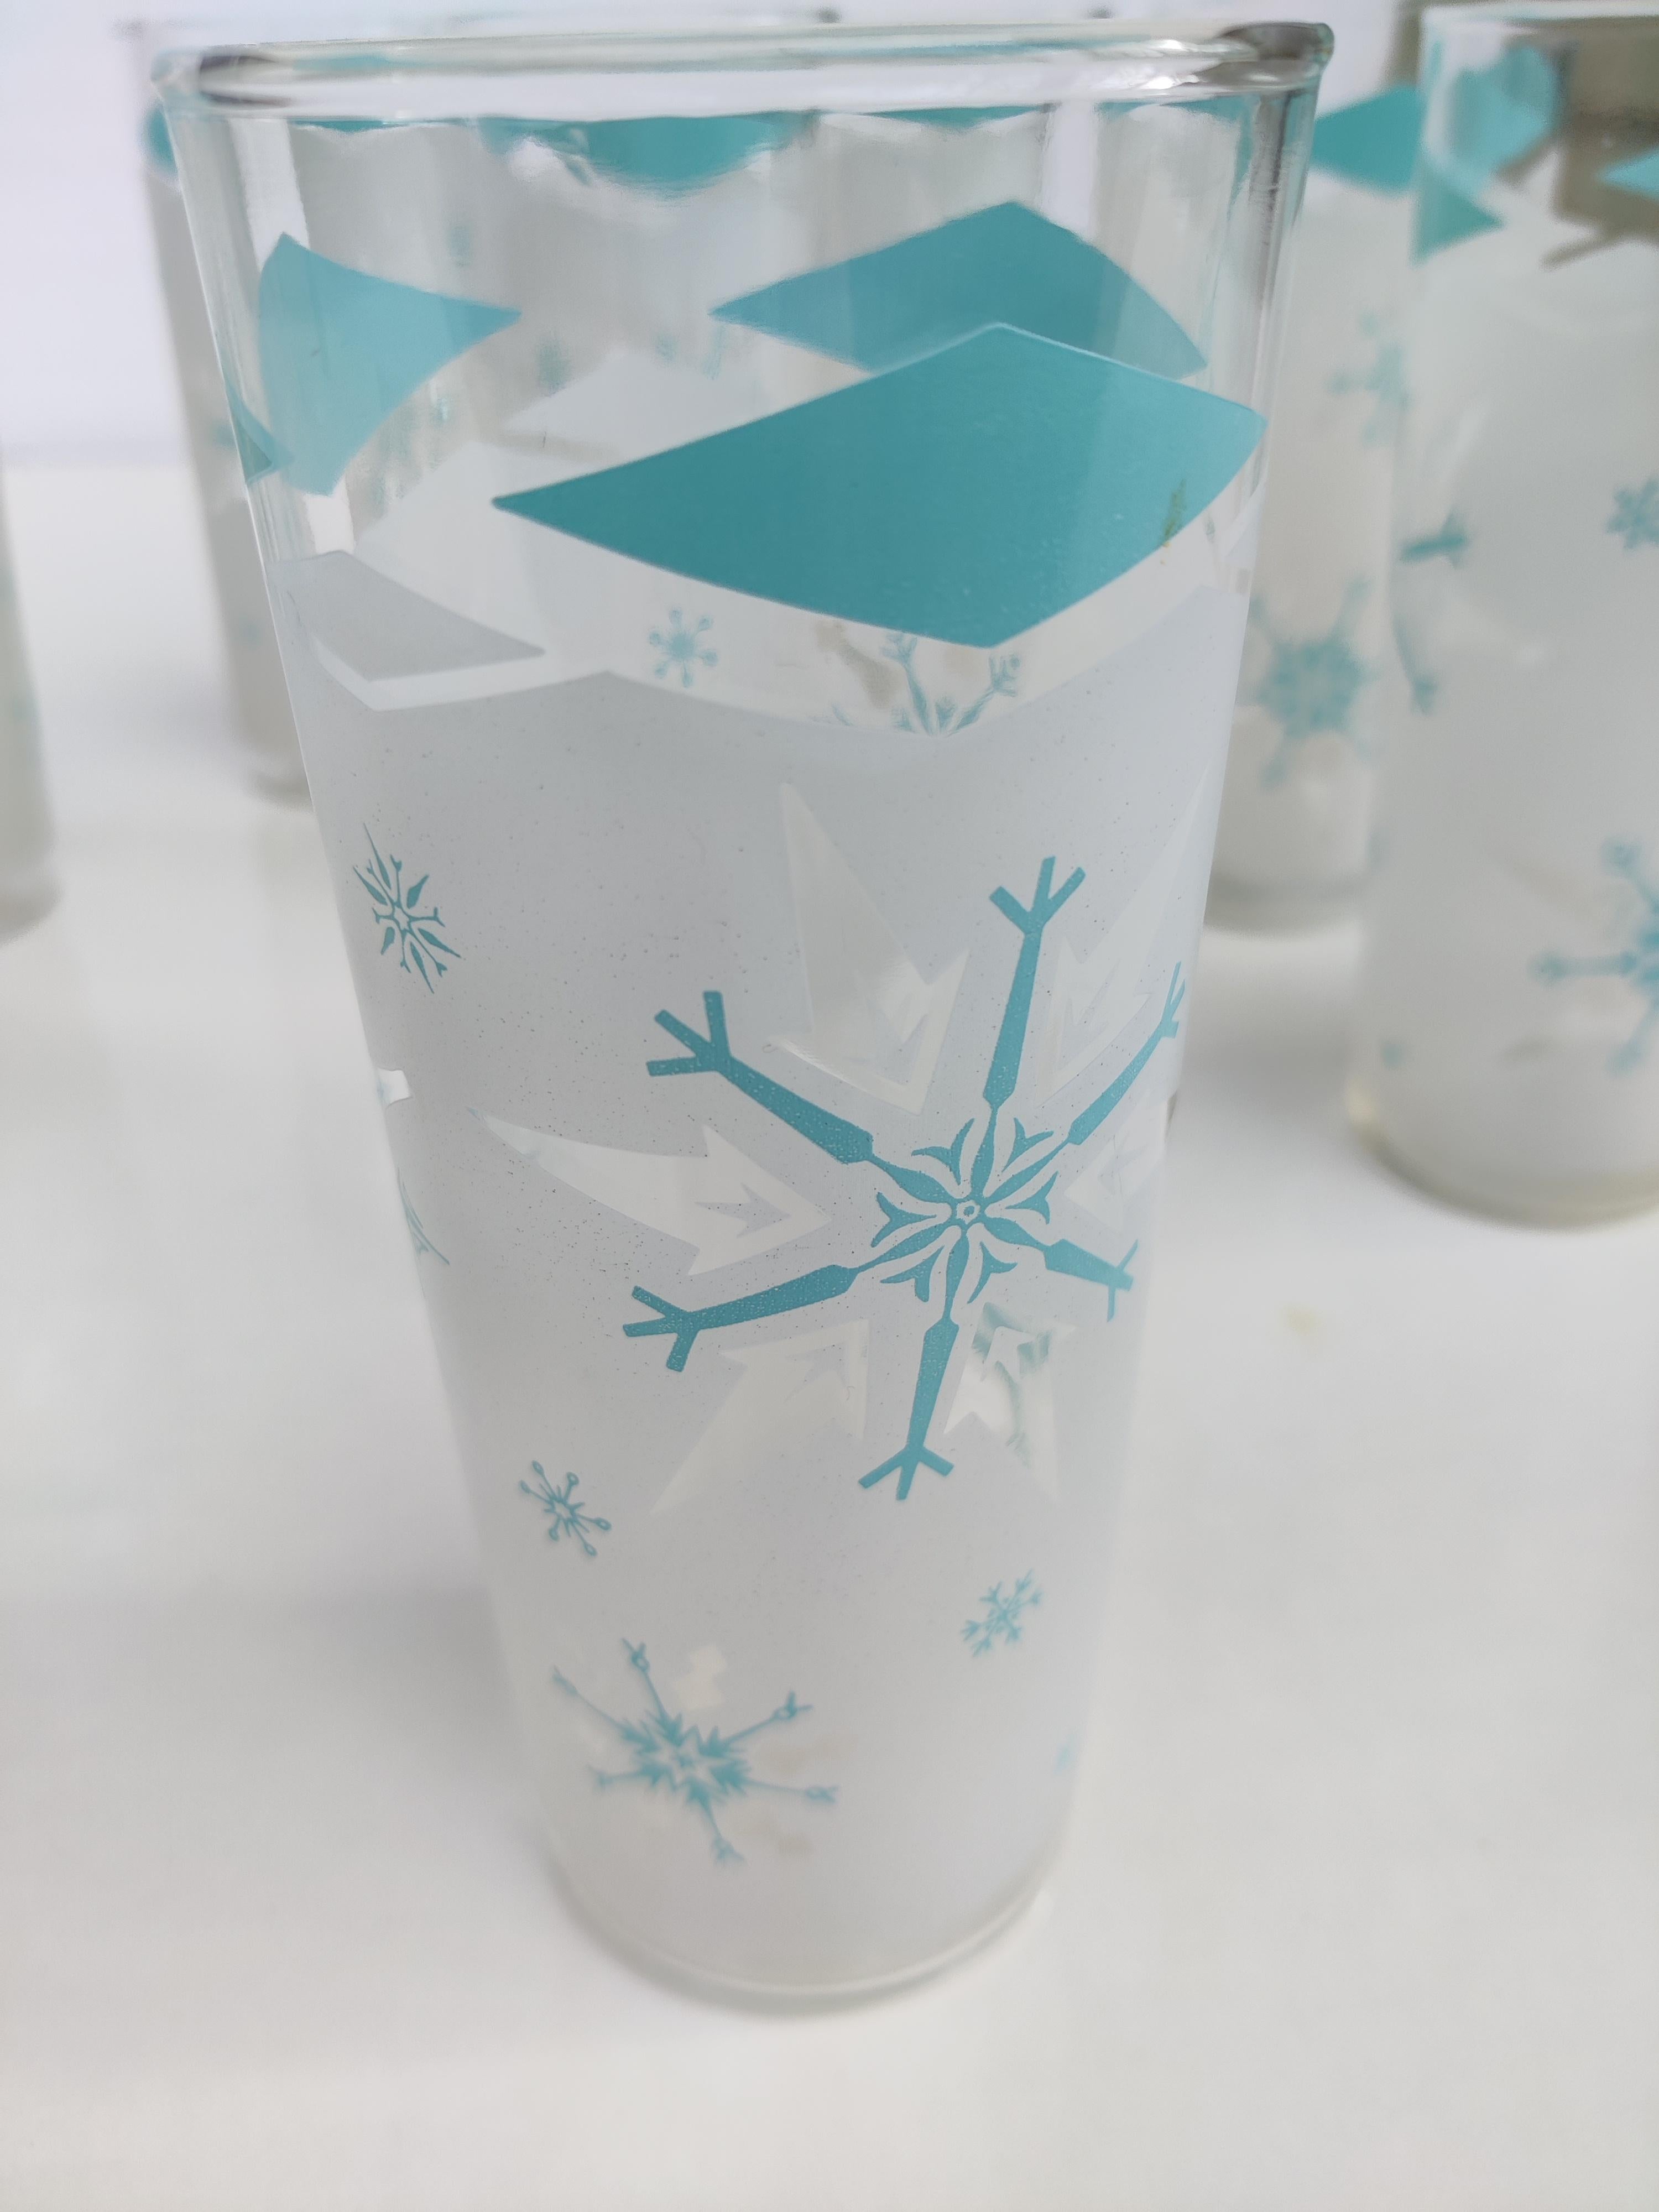 Mid-century Anchor Hocking Atomic Snowflake Glasses Set of 8 In Excellent Condition For Sale In Cincinnati, OH